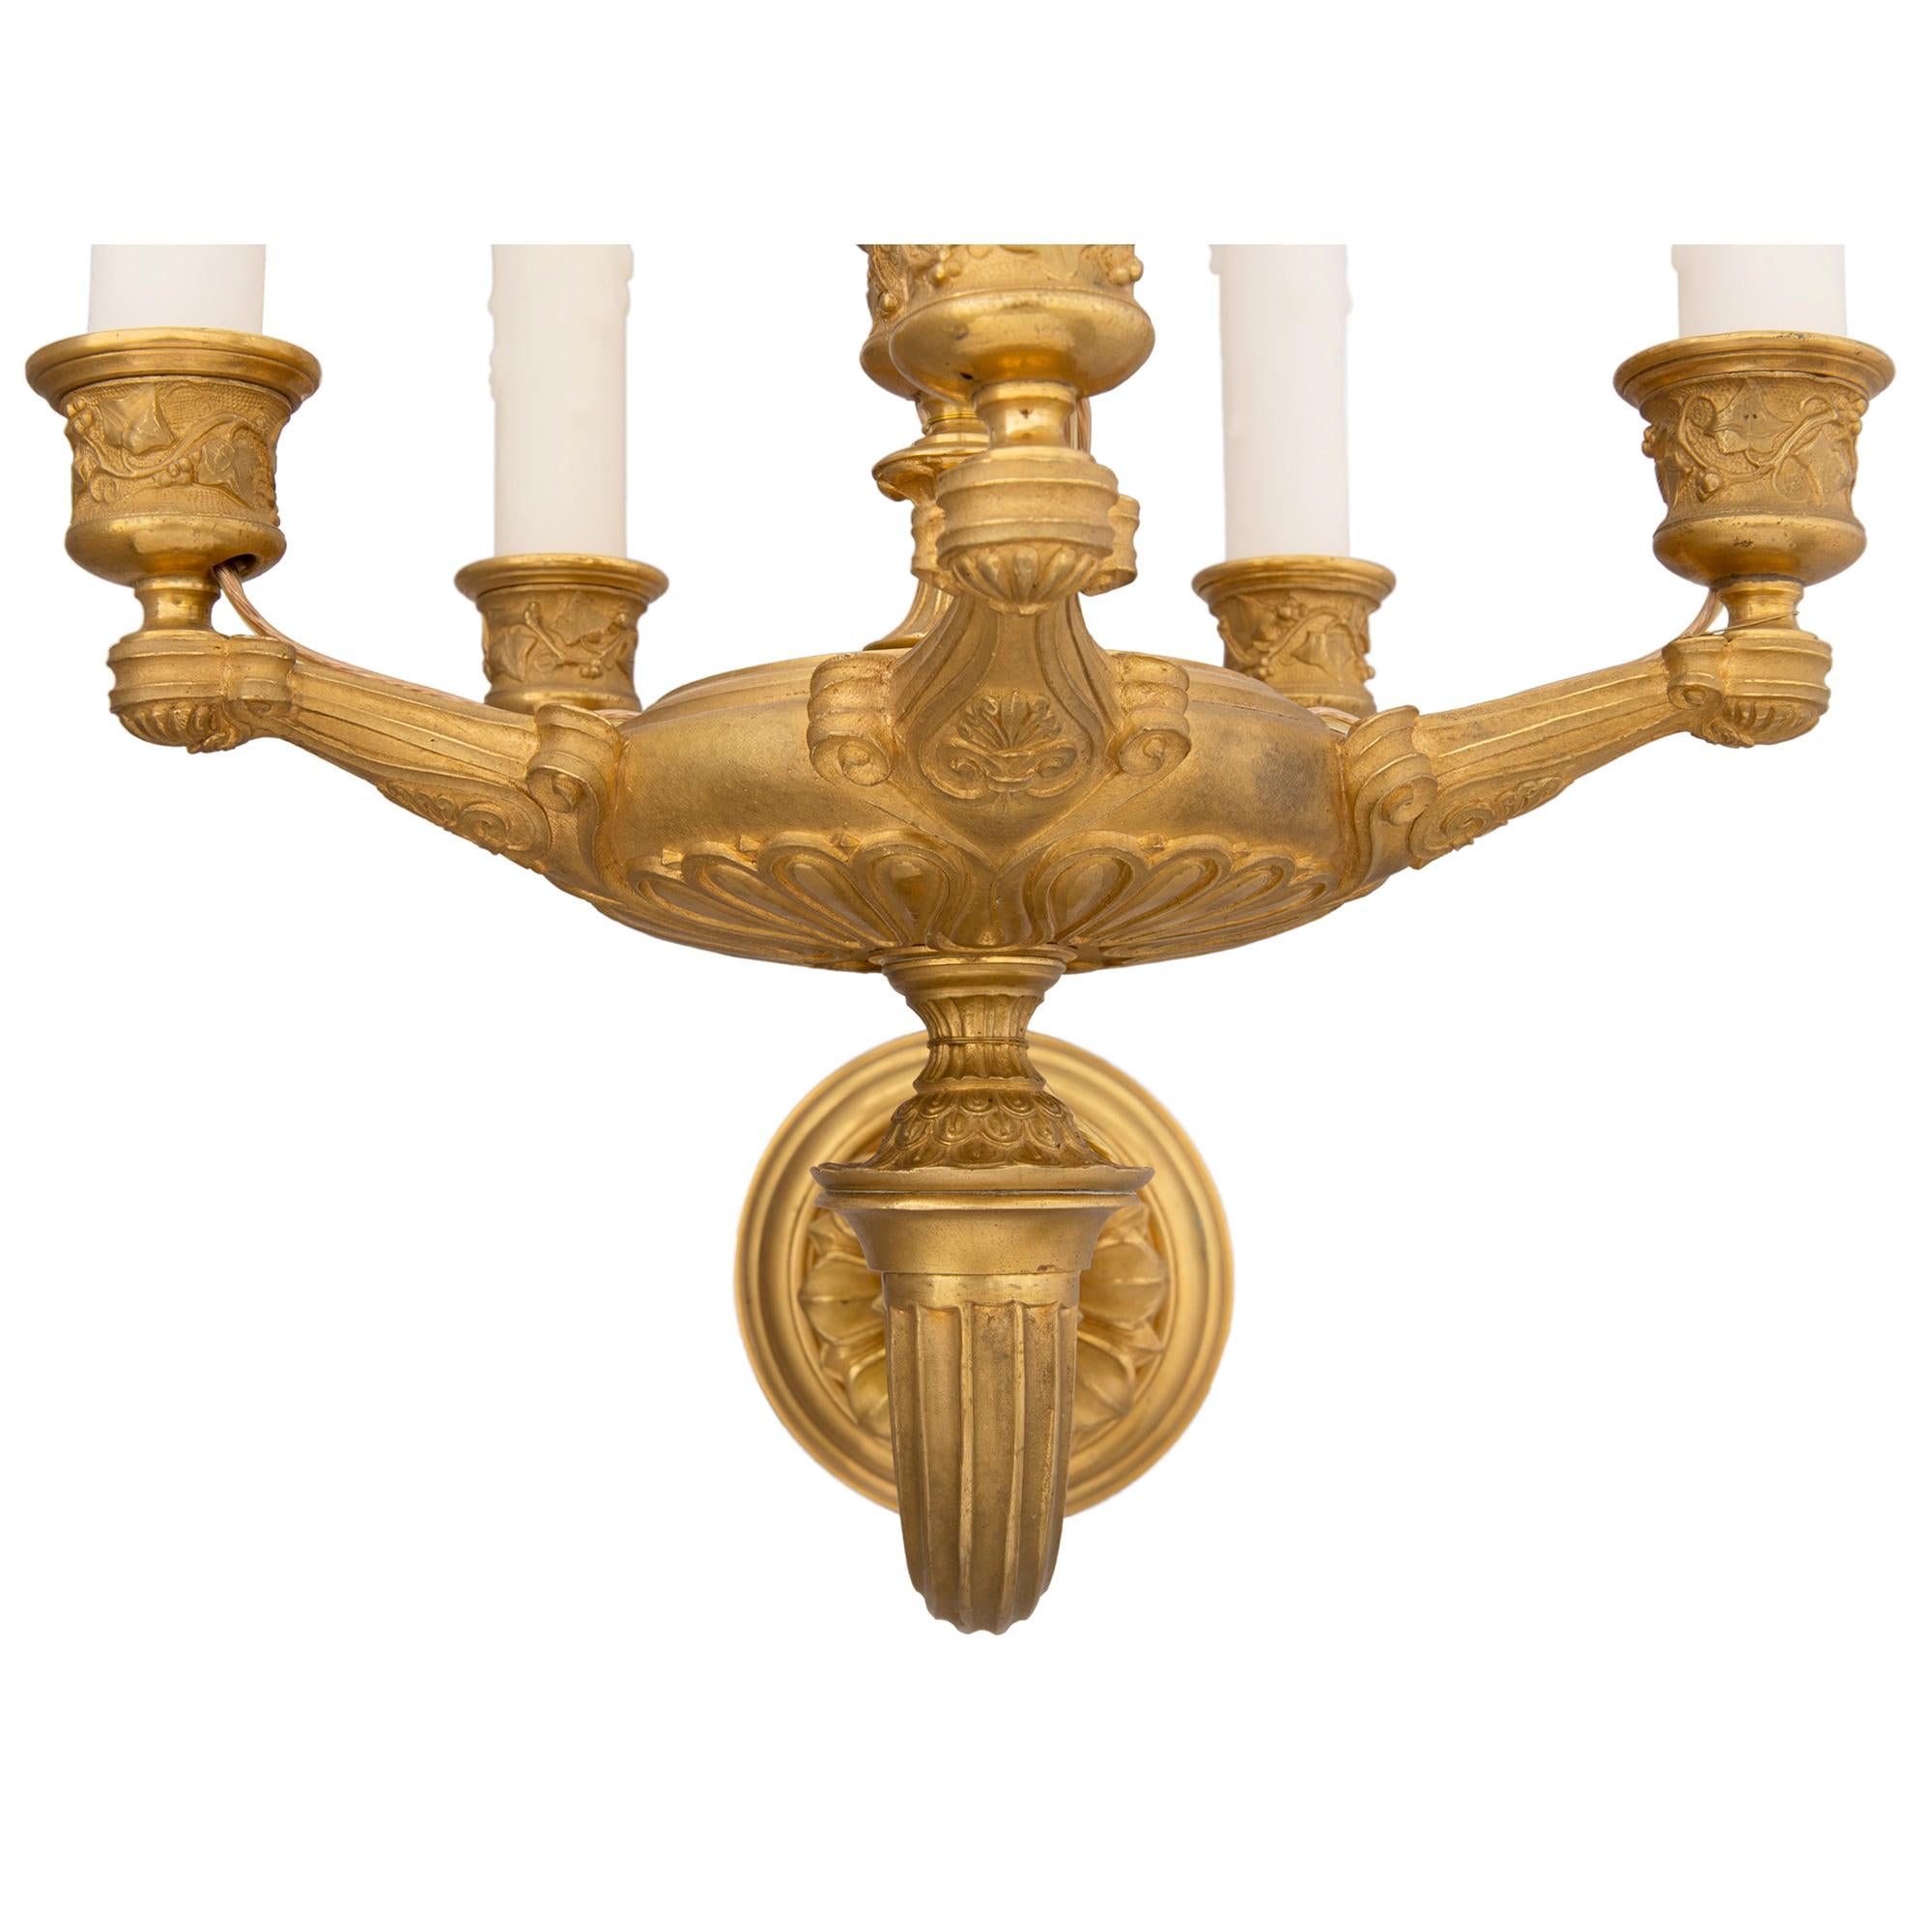 Pair of French Mid-19th Century Empire Style Six-Arm Ormolu Sconces For Sale 2